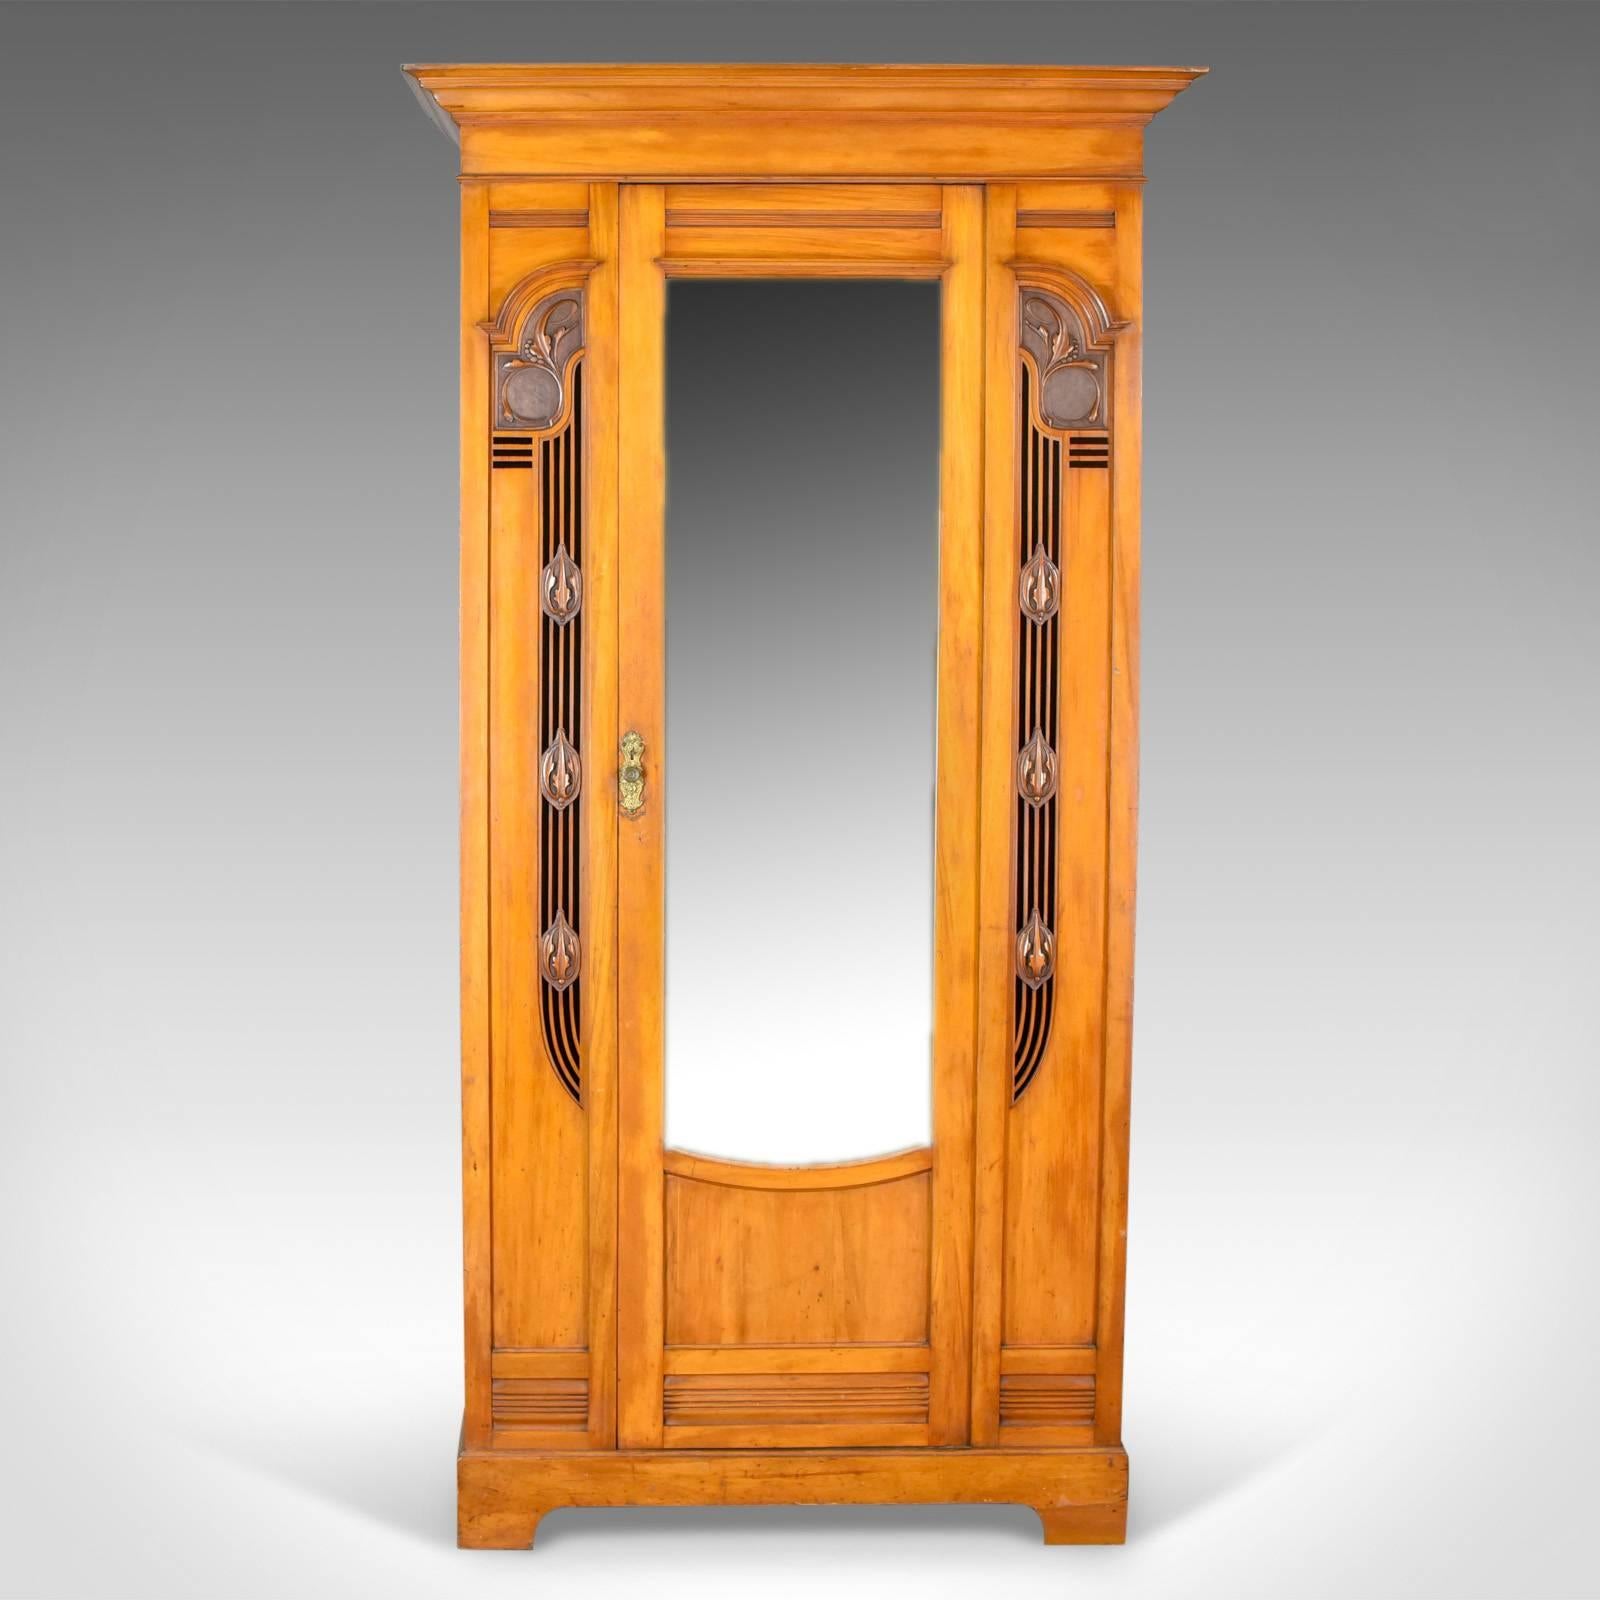 This is an antique single wardrobe in satinwood, an English compactum from the Art Nouveau movement of the early 20th century, circa 1920.

Delightful piece with Classic Art Nouveau overtones
Good color throughout with a desirable aged